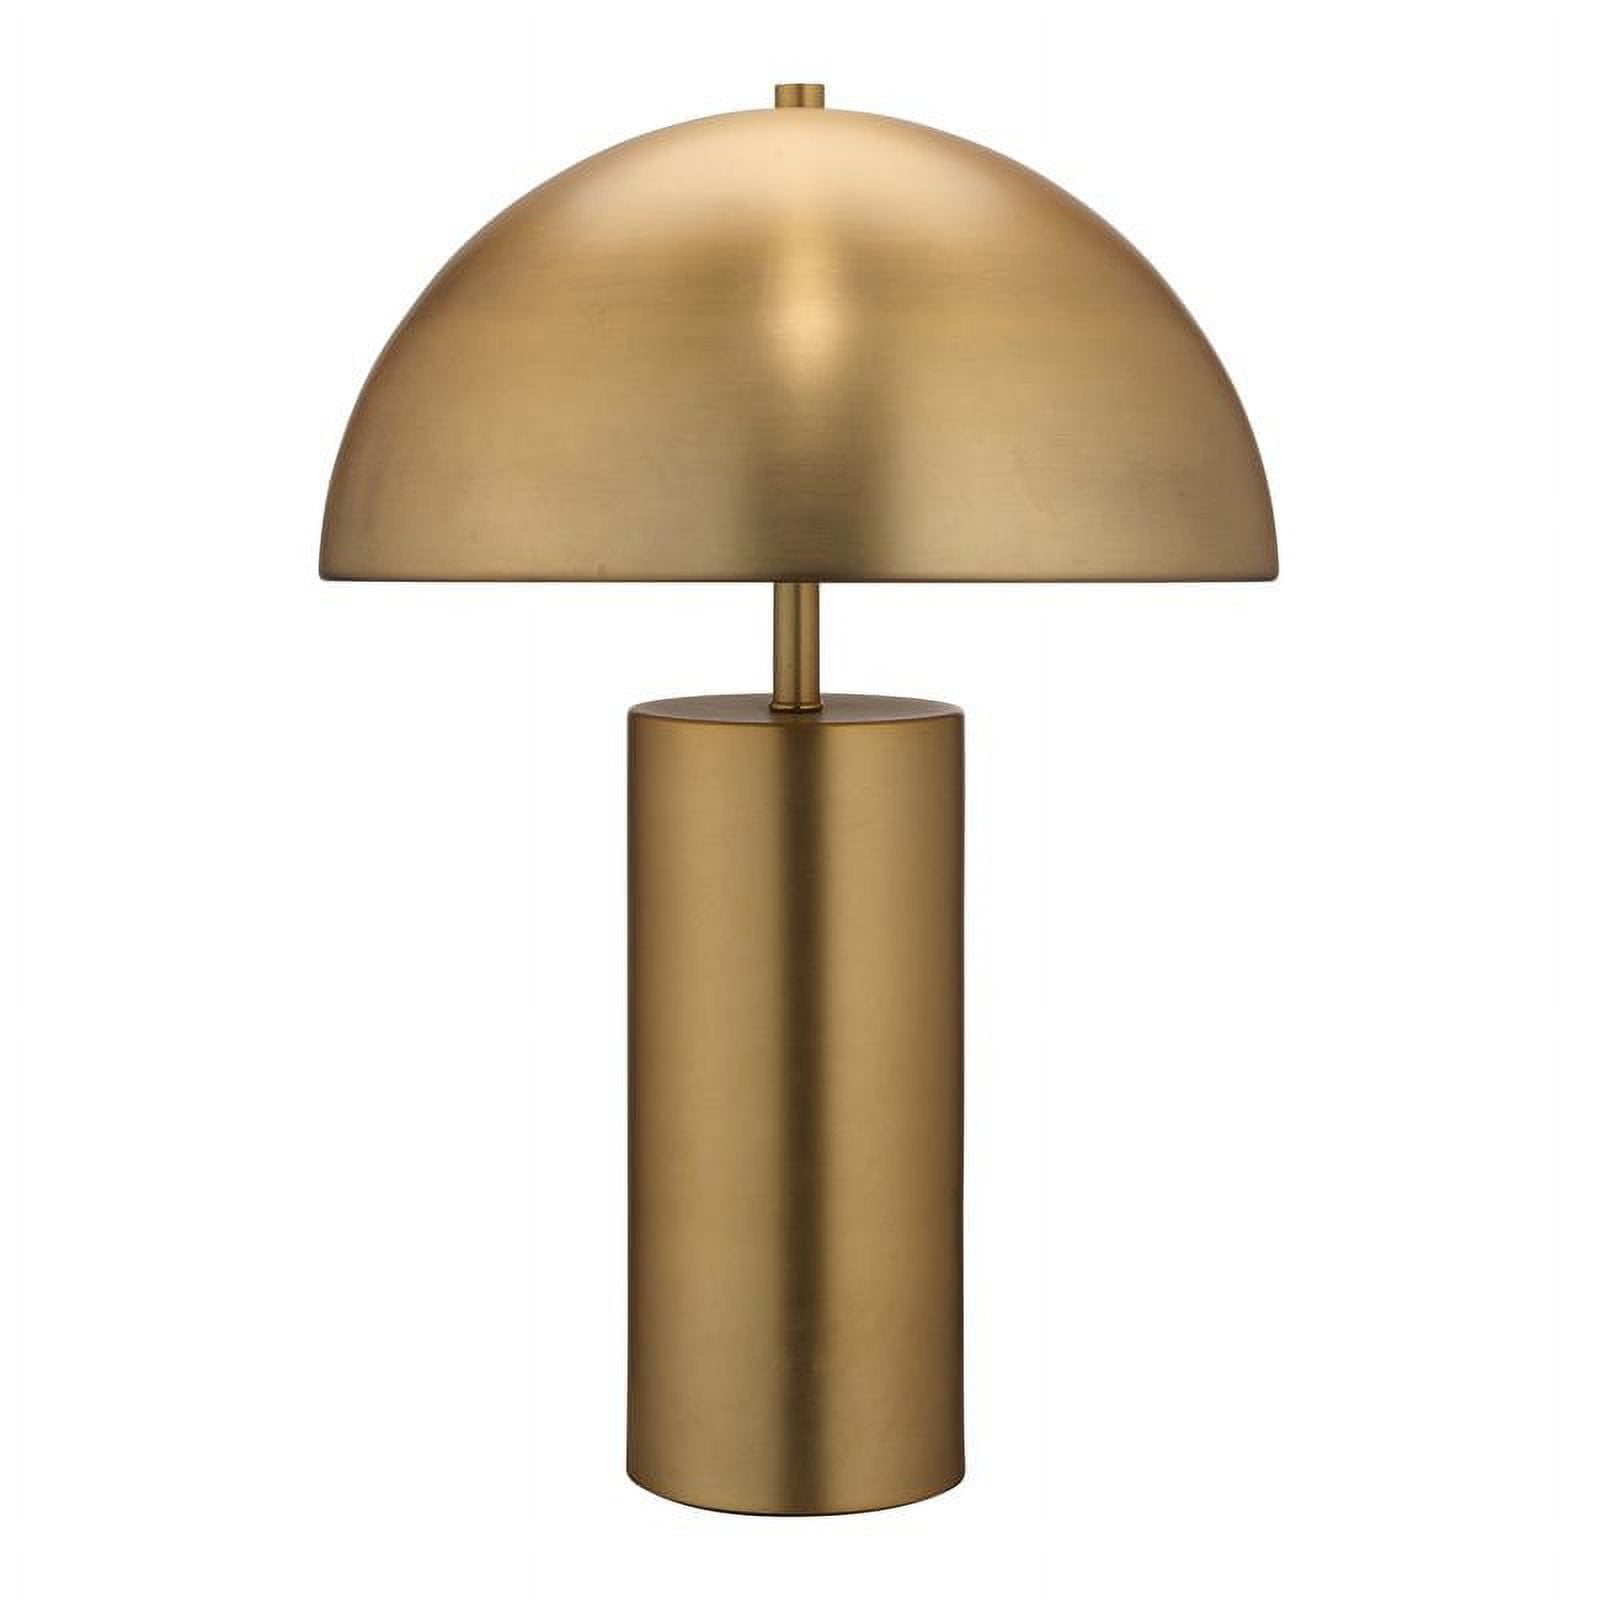 Eden Home Modern Iron Table Lamp with Geometric Shape in Antique Brass - Walmart.com